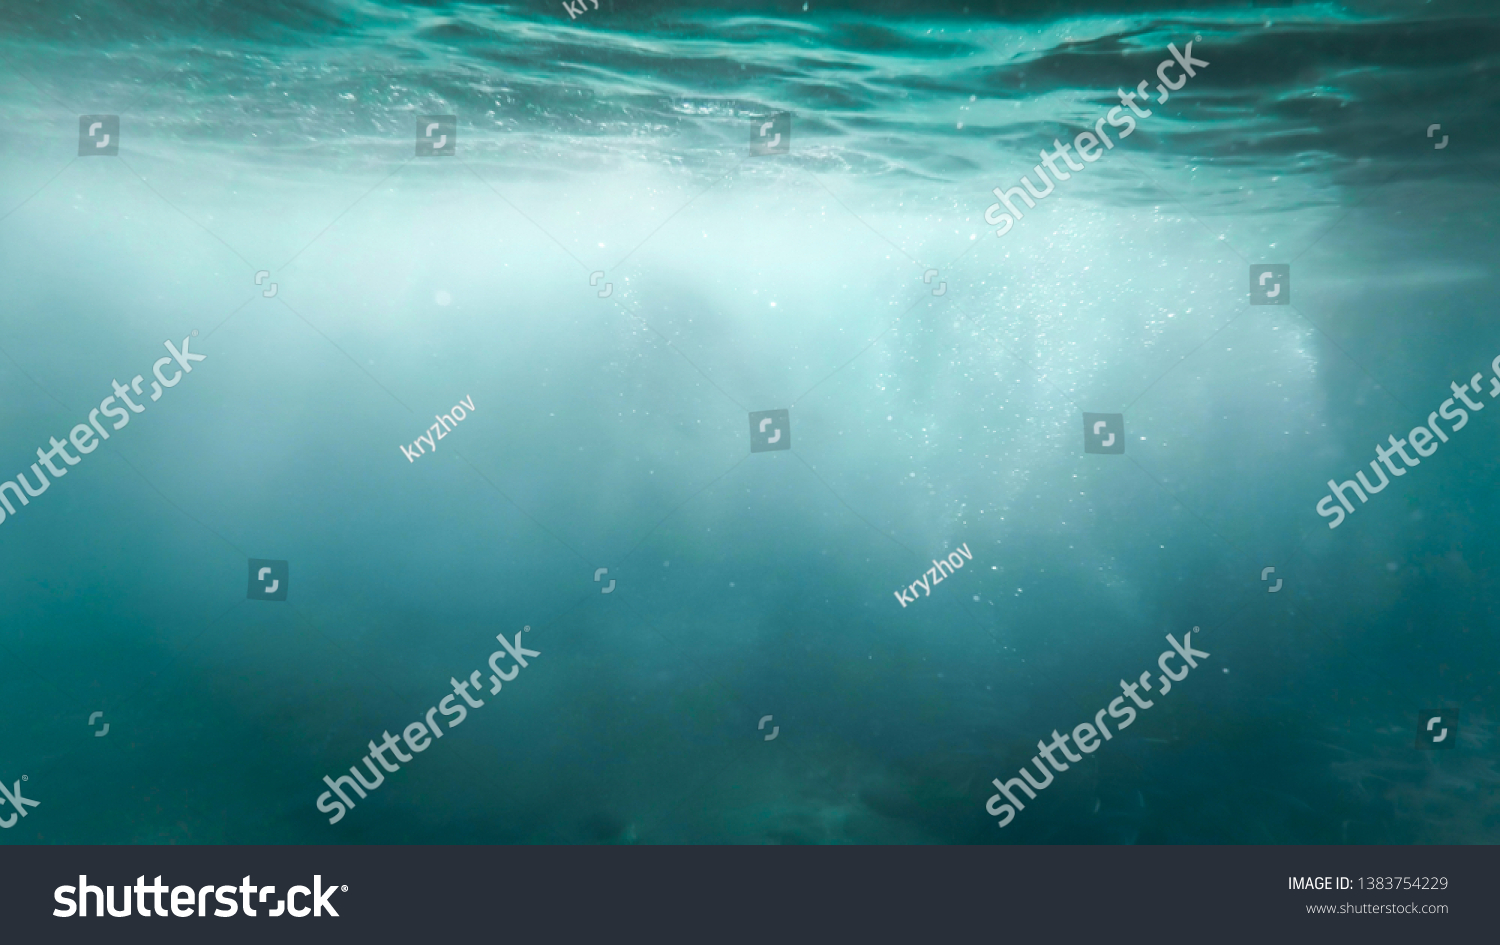 Abstract photo of lots of bubbles floating in clear turqouise sesa water #1383754229